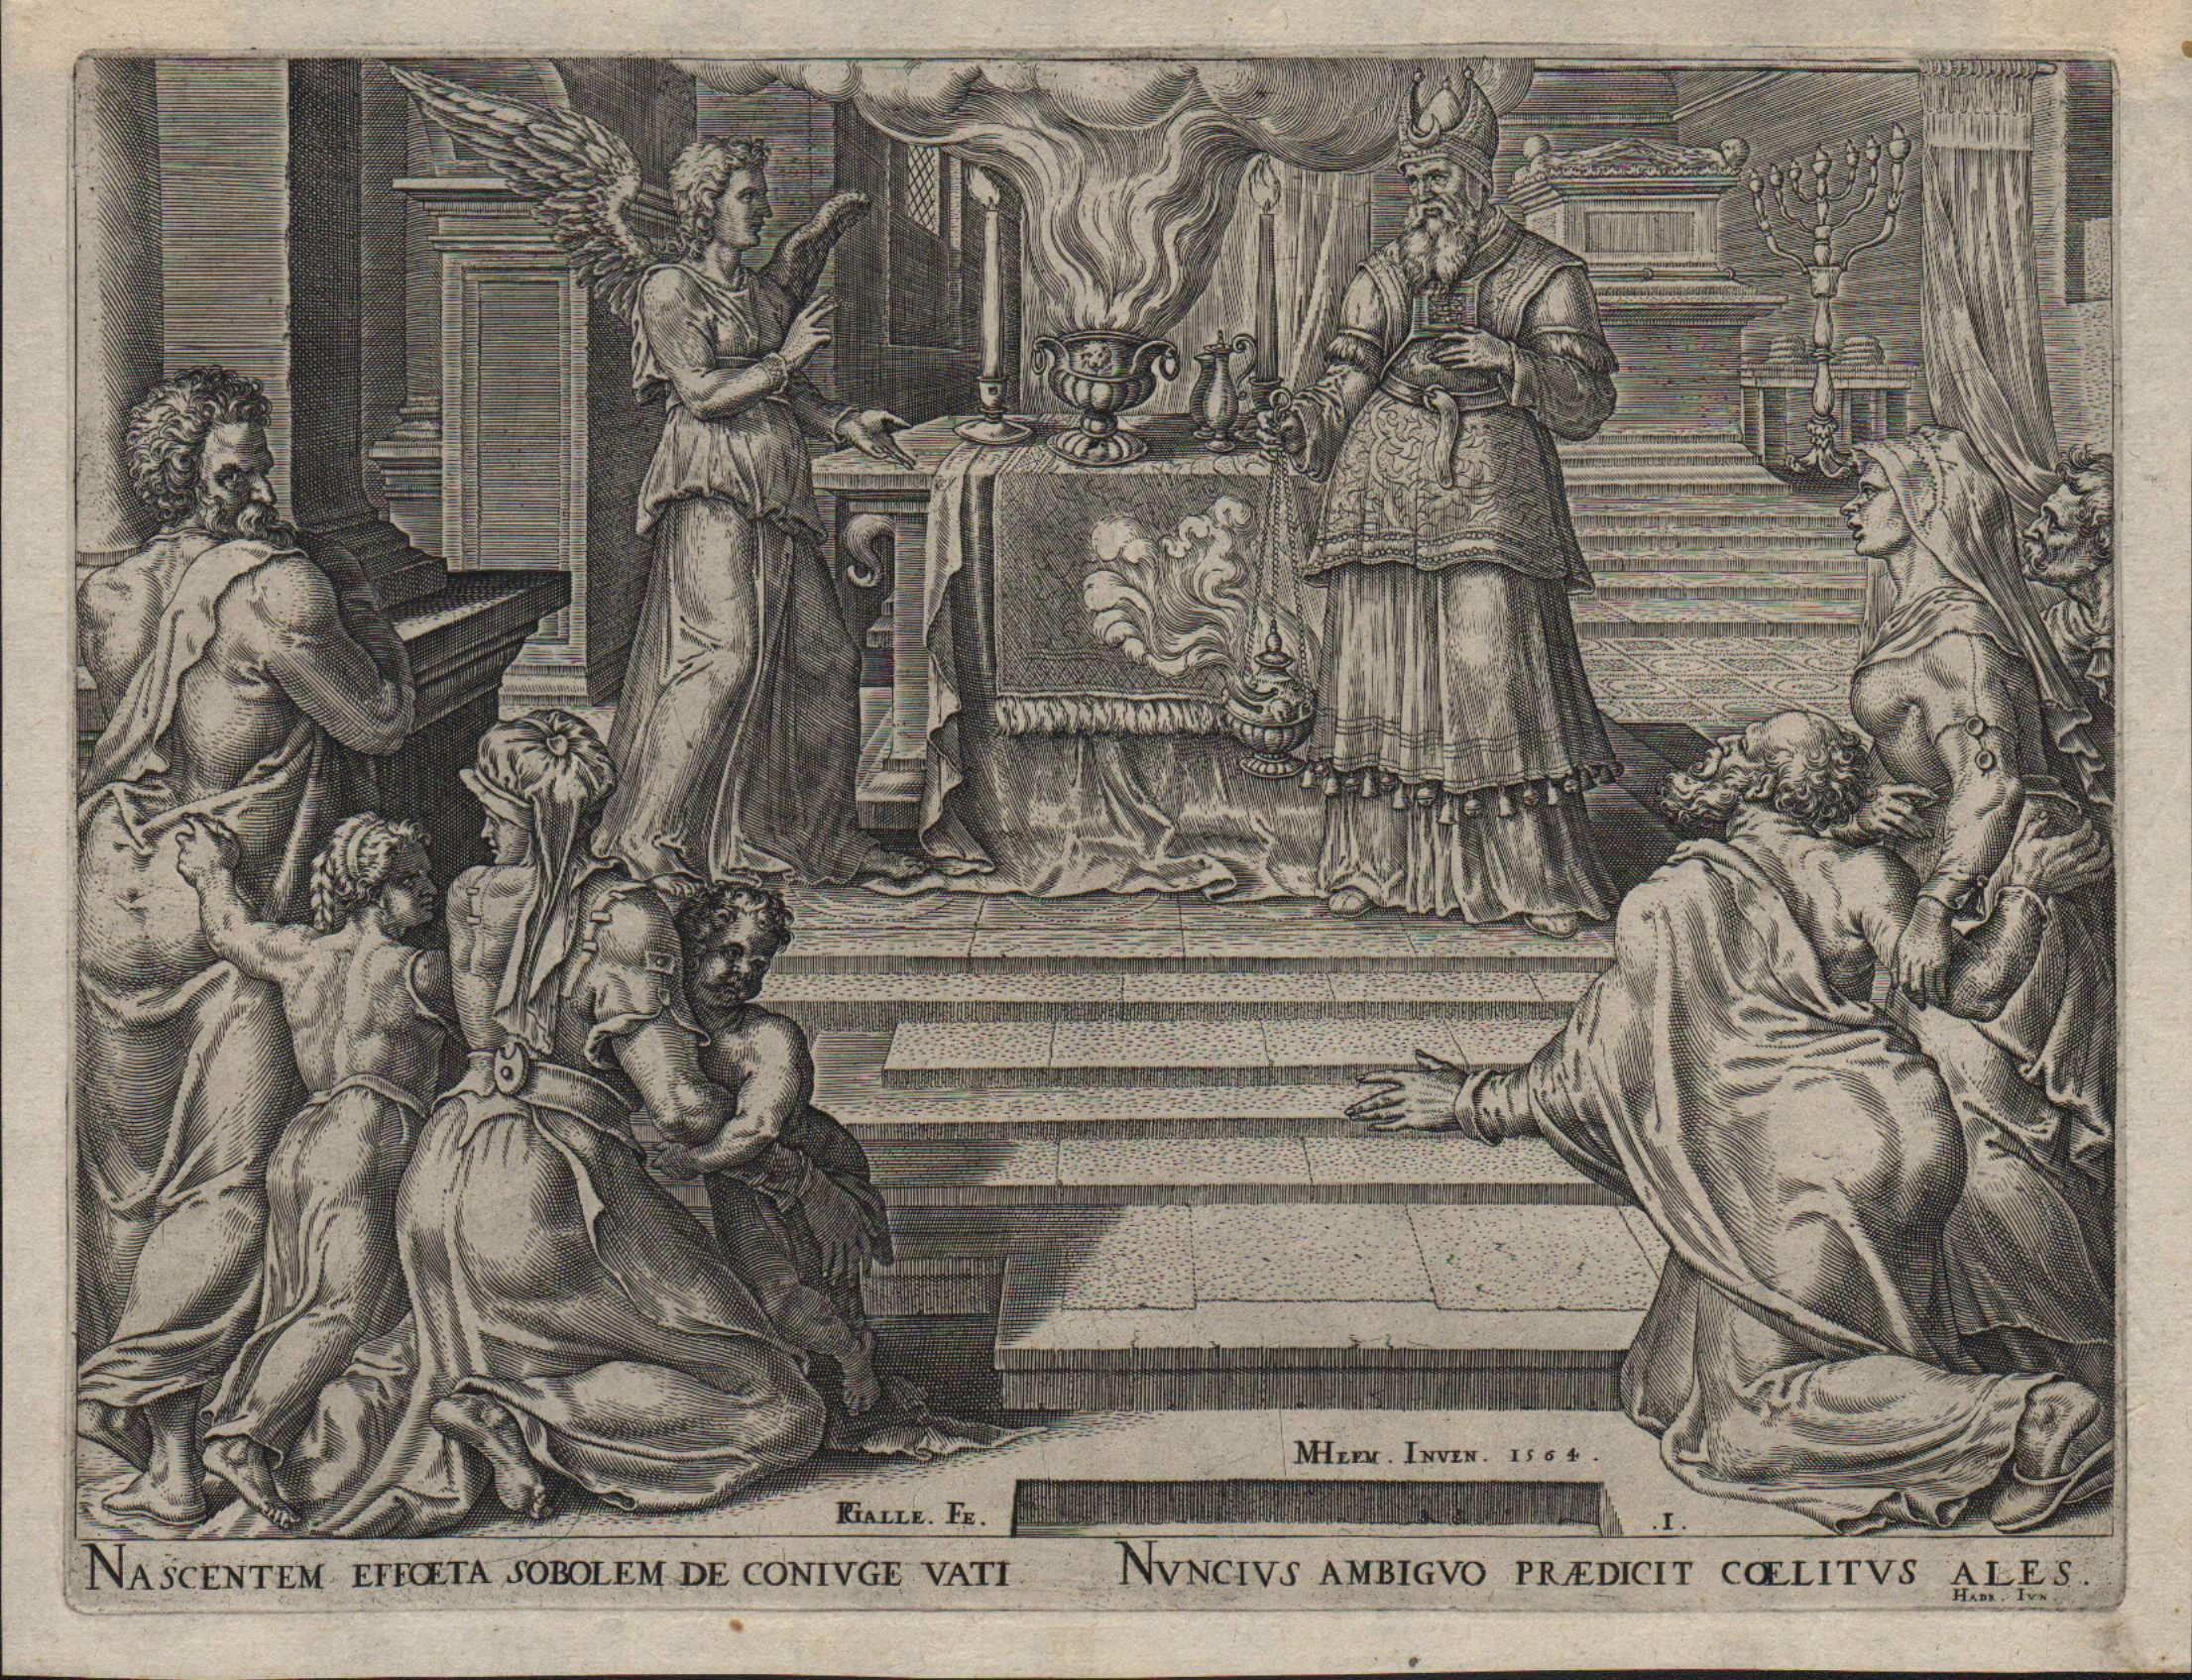 Philips Galle Figurative Print - Zecharias Preaching in the Temple - 1564 Old Master Engraving Religious